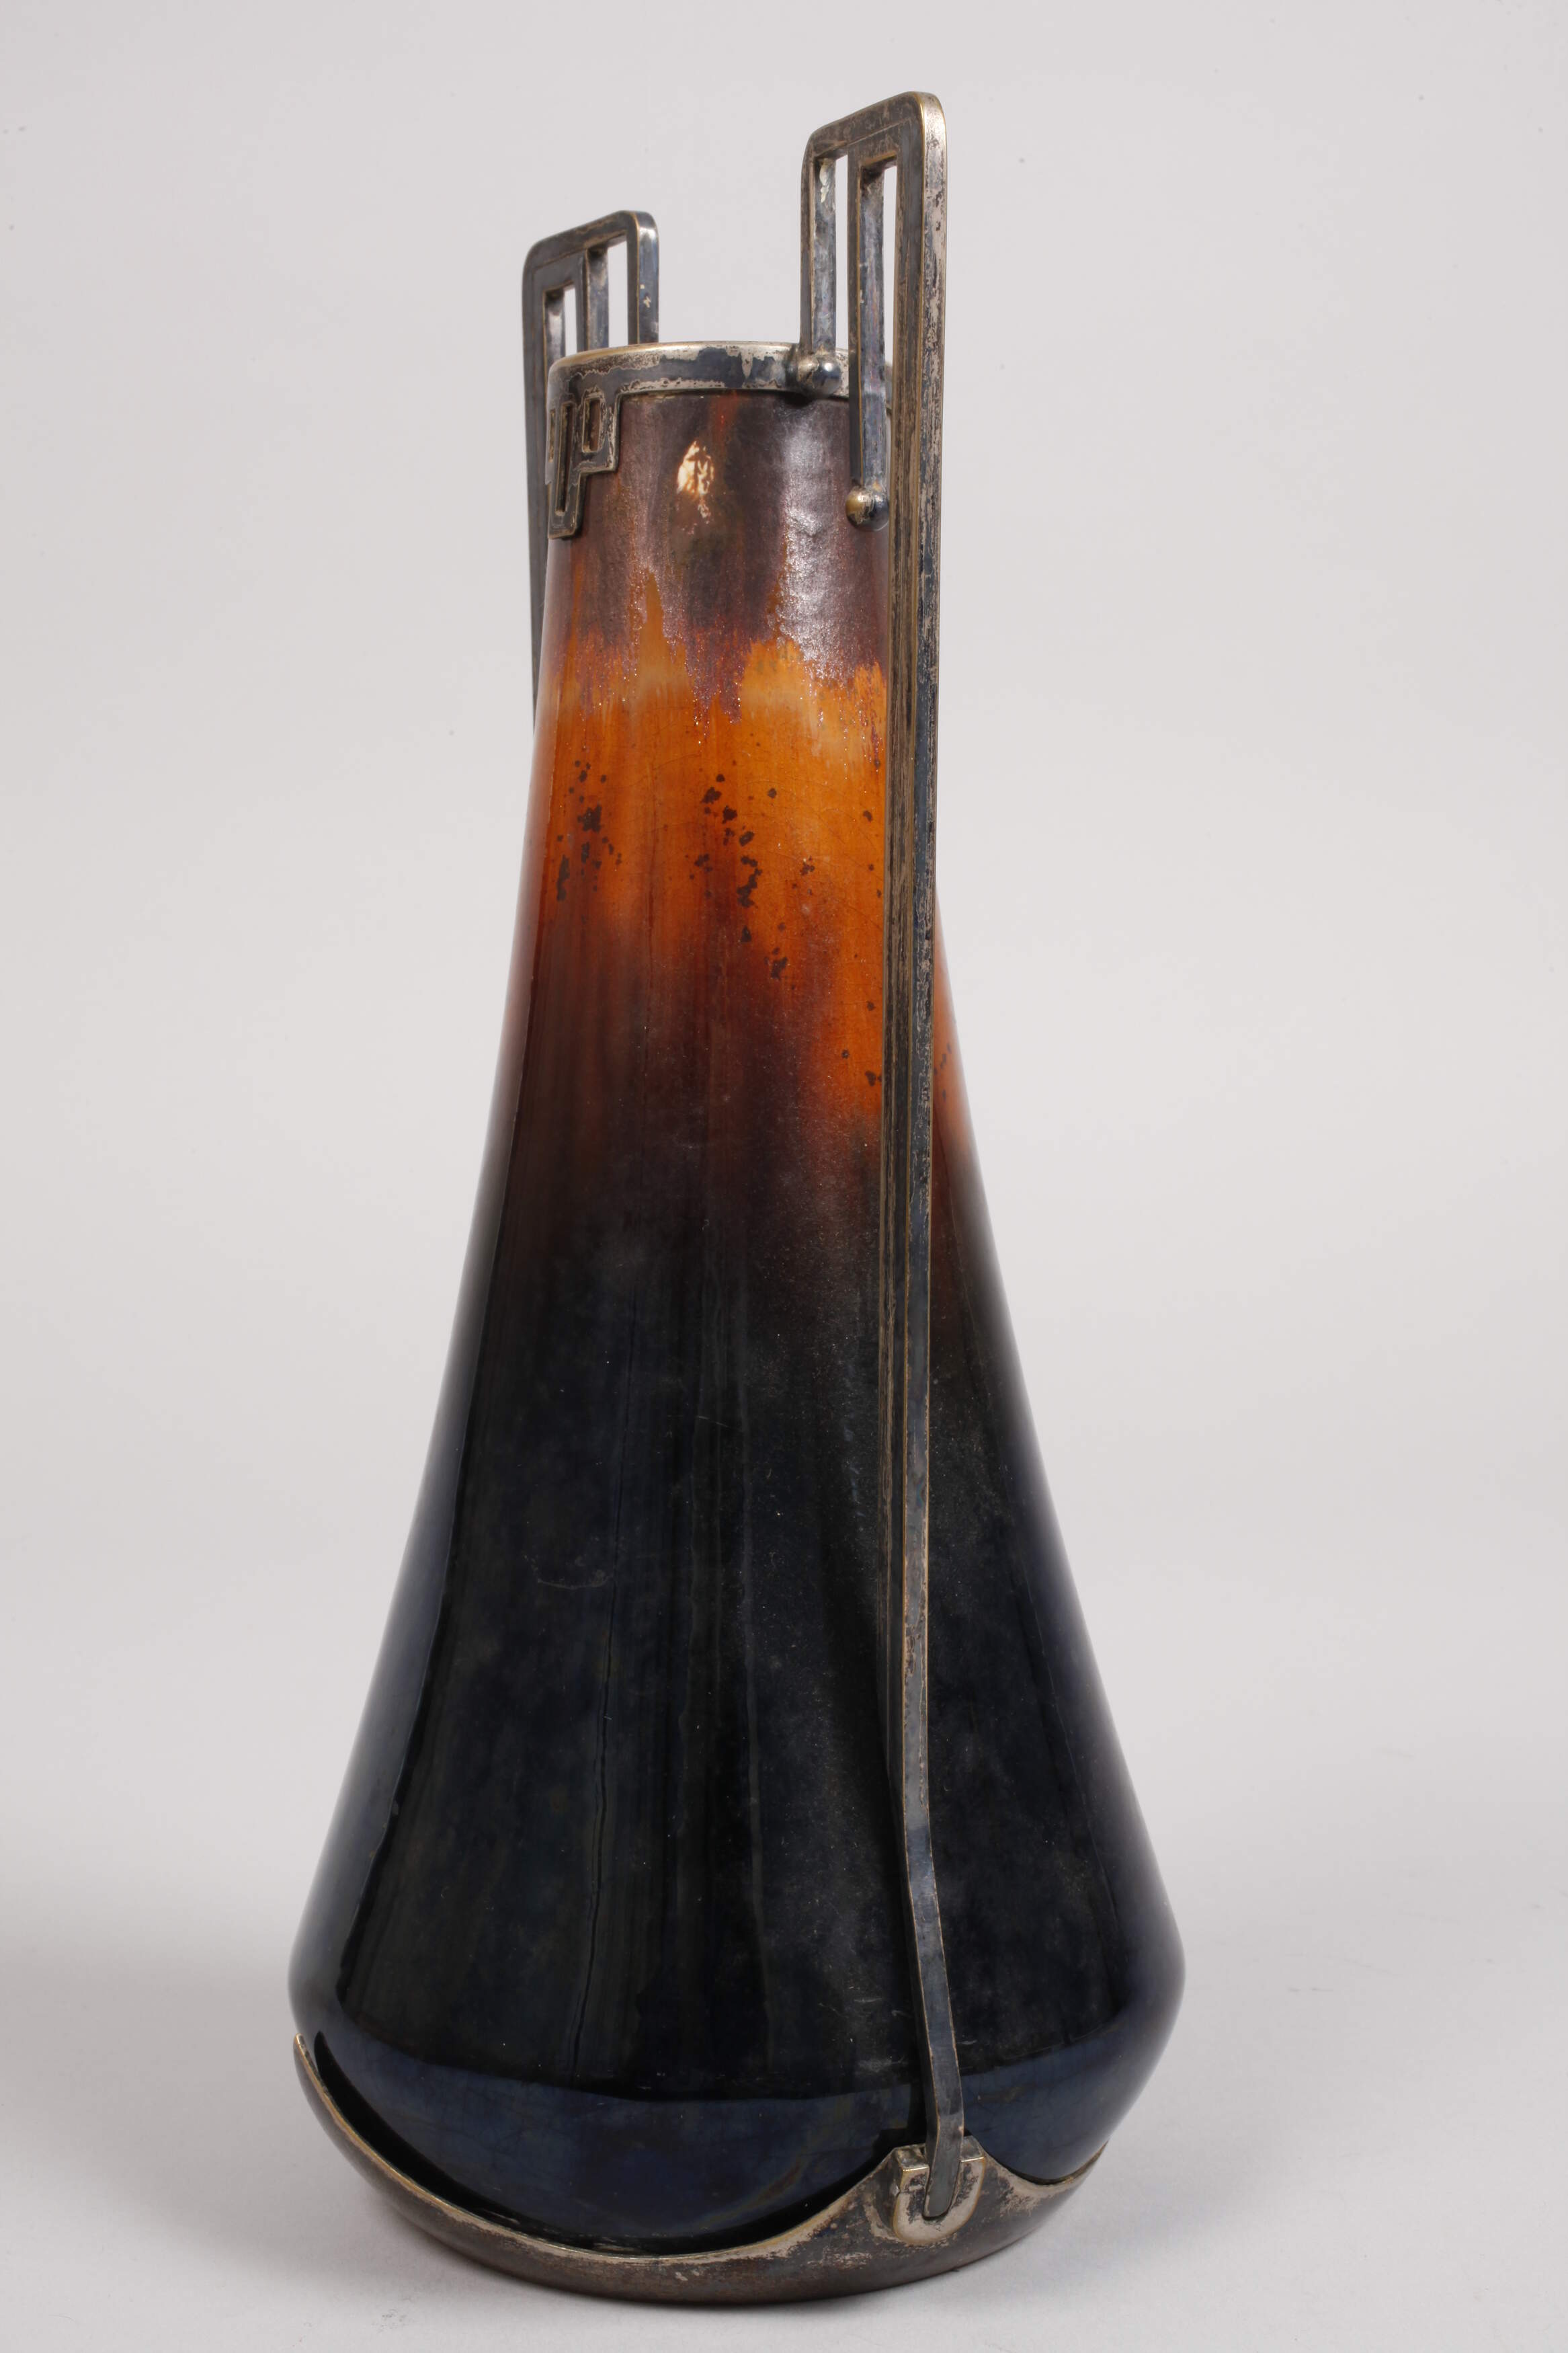 Running-glaze vase Viennese Secession - Image 2 of 5